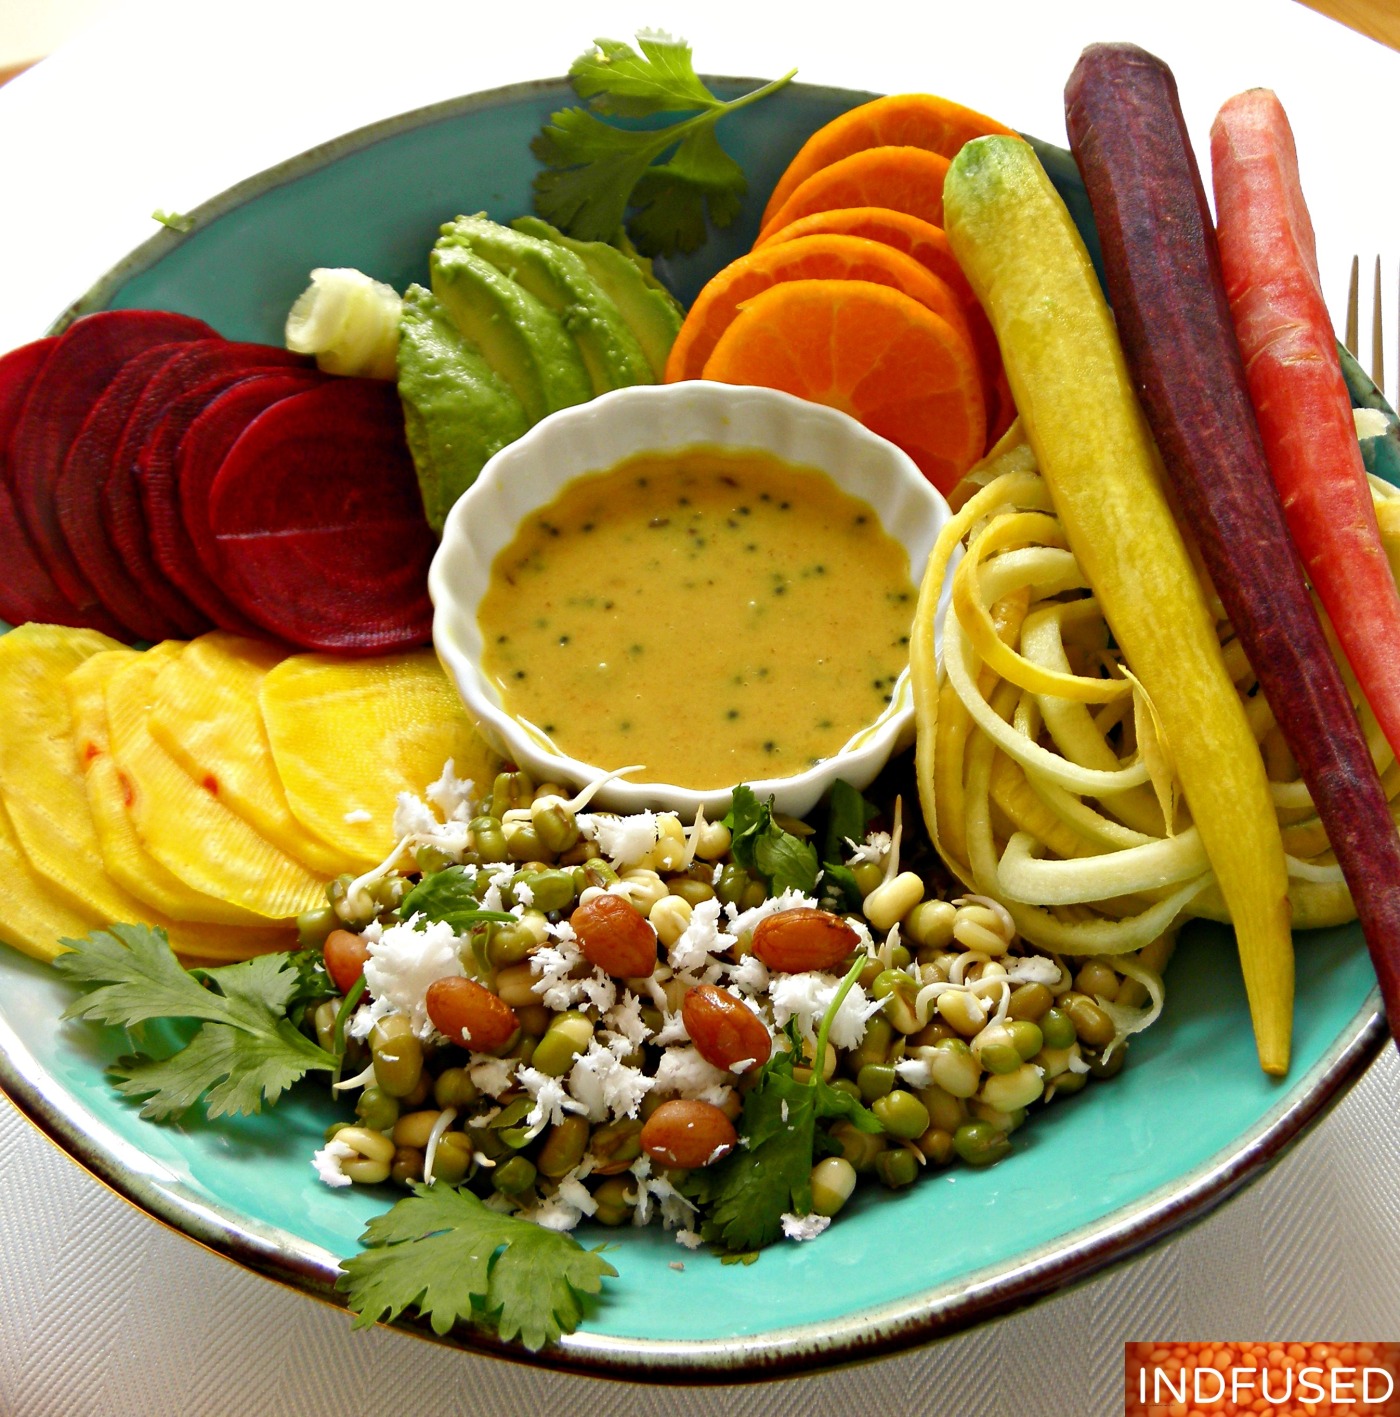 Mung Bean salad with veggies and fruit of the season and a nummy dressing! Indian fusion recipe for a healthy happy summer.